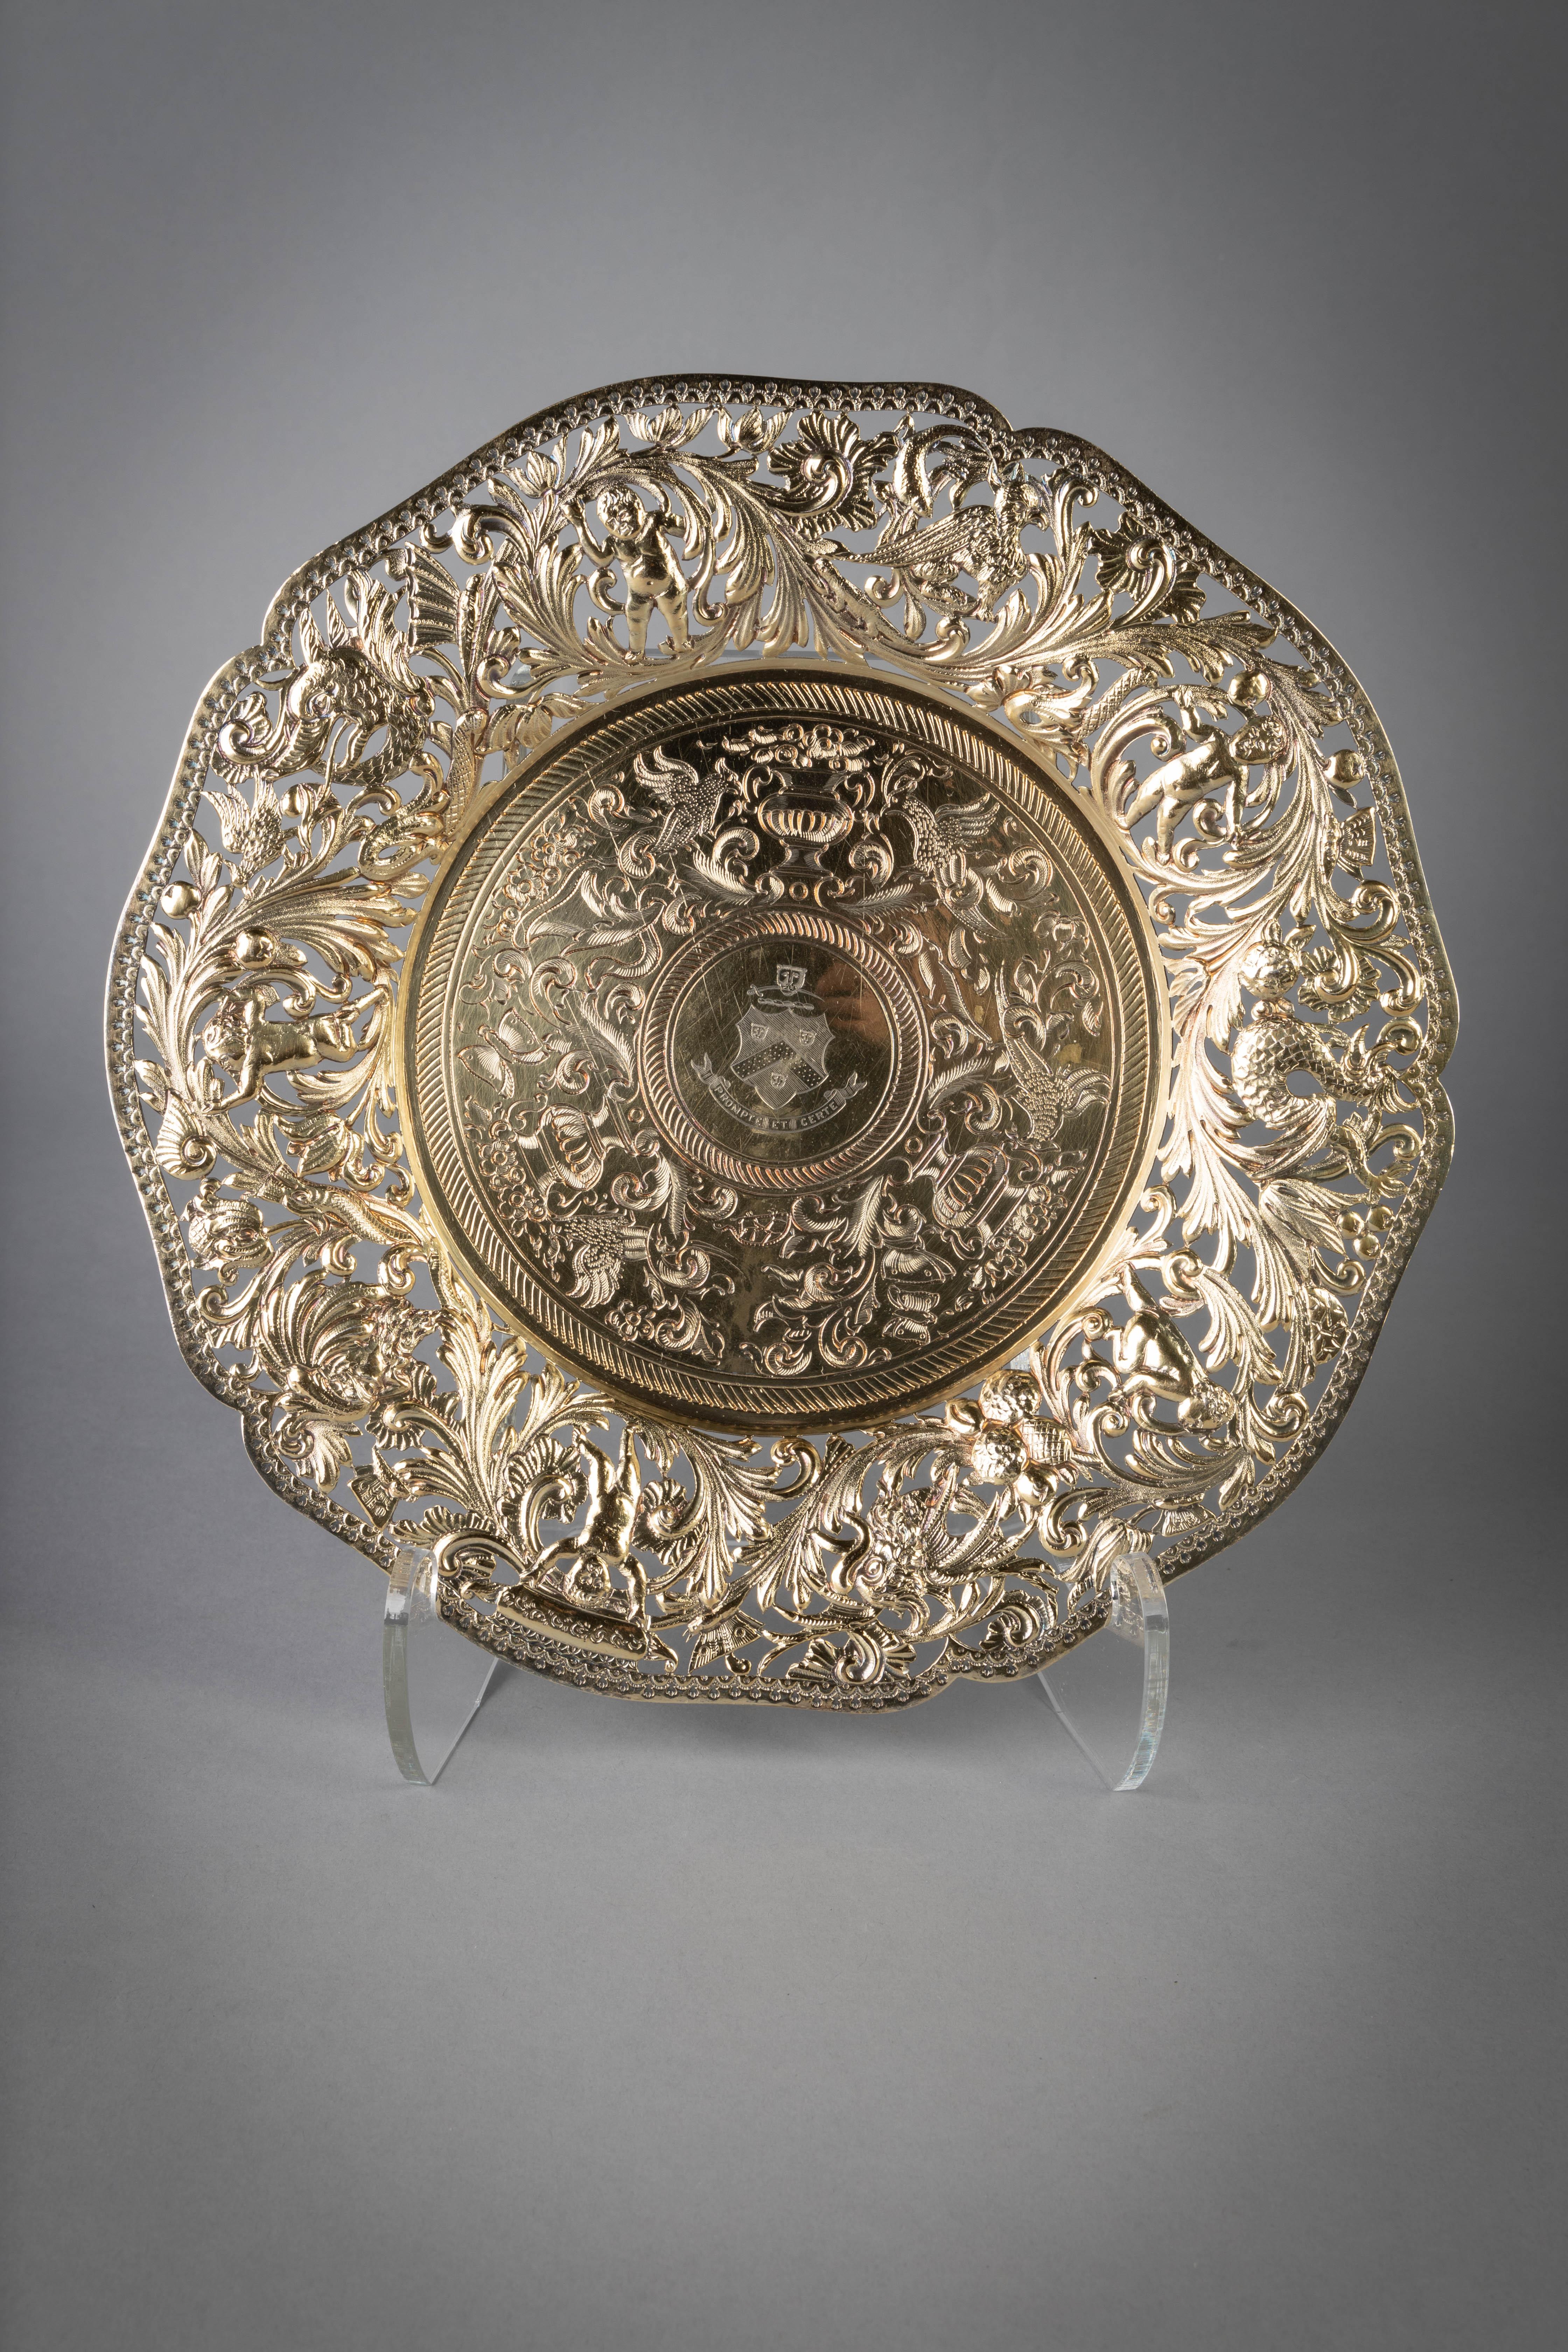 Comprising 11 German plates circa 1880, 5 English silver Victorian plates, 3 Georgian silver plates. Each centered with an identical crest with motto 'Prompte Et Certe' surrounded by engraved scrollwork and vases with flowers flanked by birds and